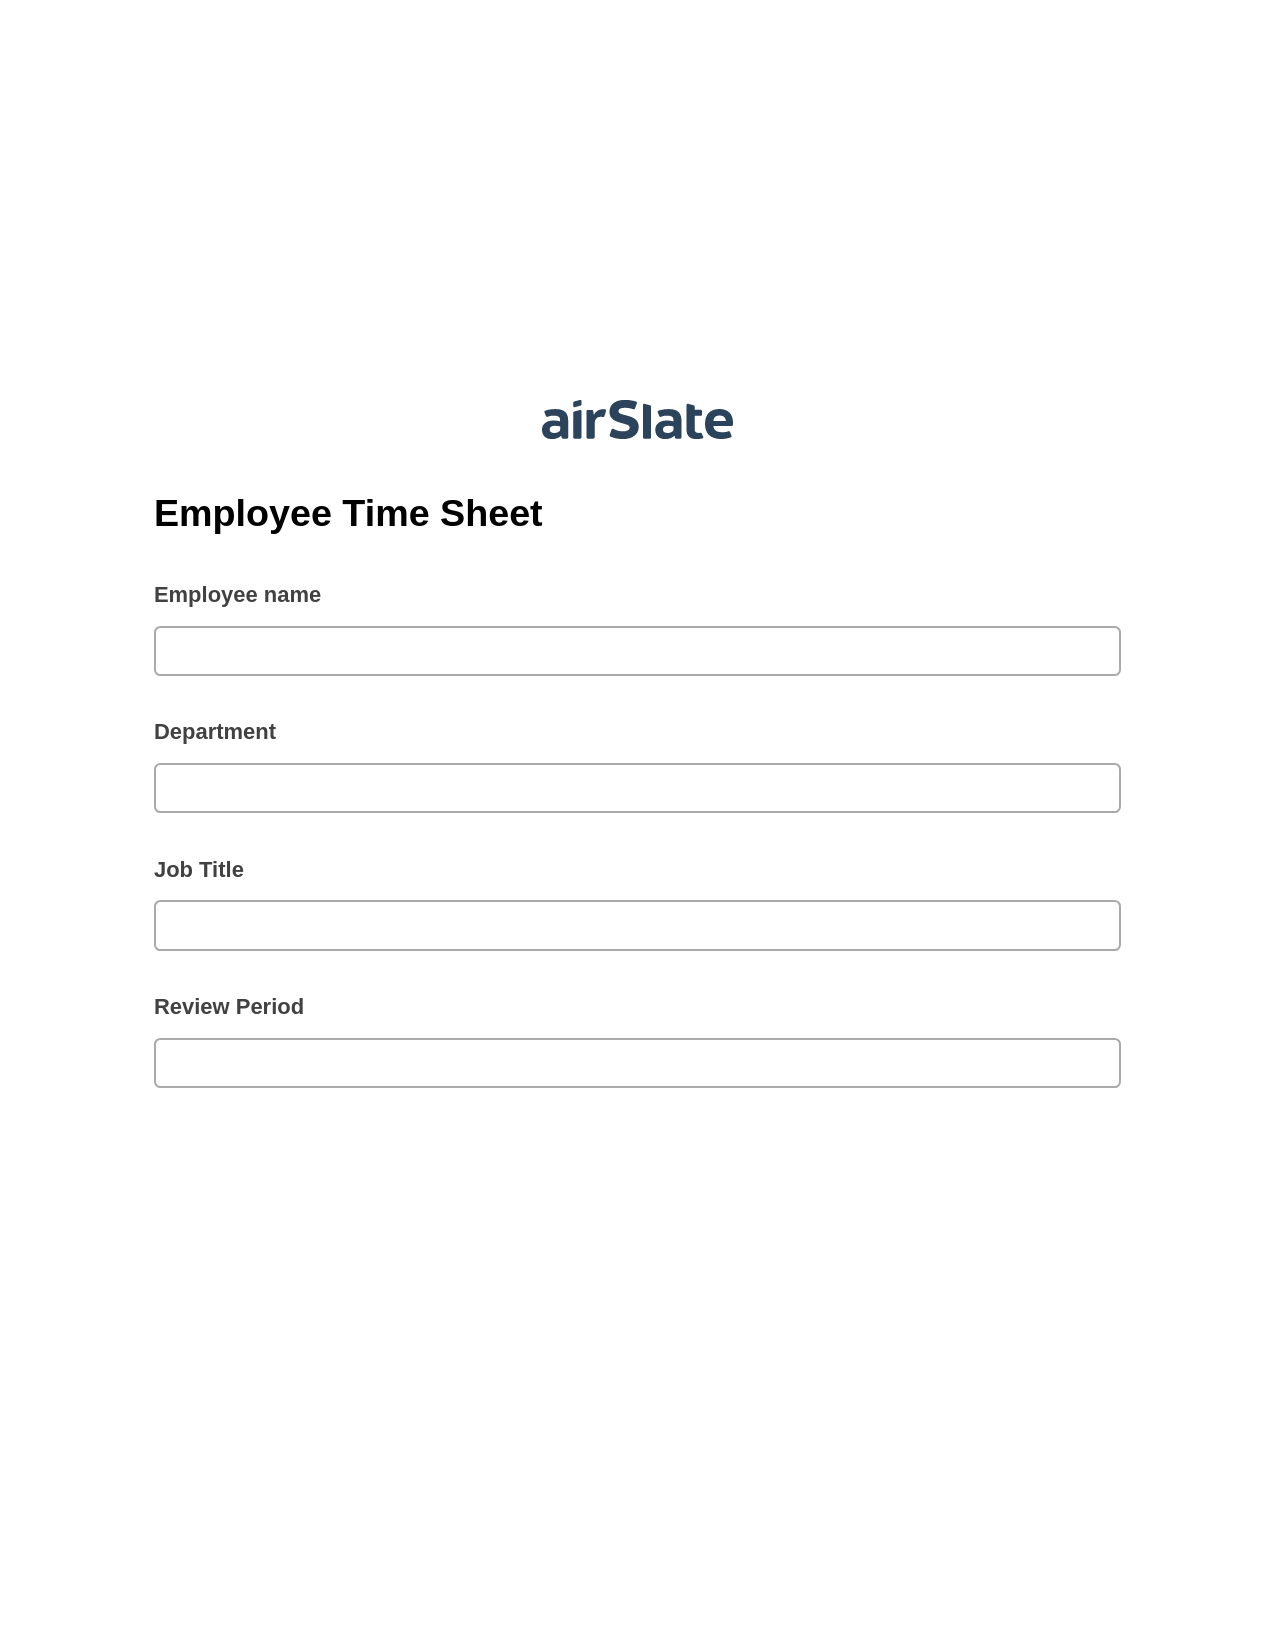 Employee Time Sheet Prefill from NetSuite records, Update Audit Trail Bot, Archive to OneDrive Bot